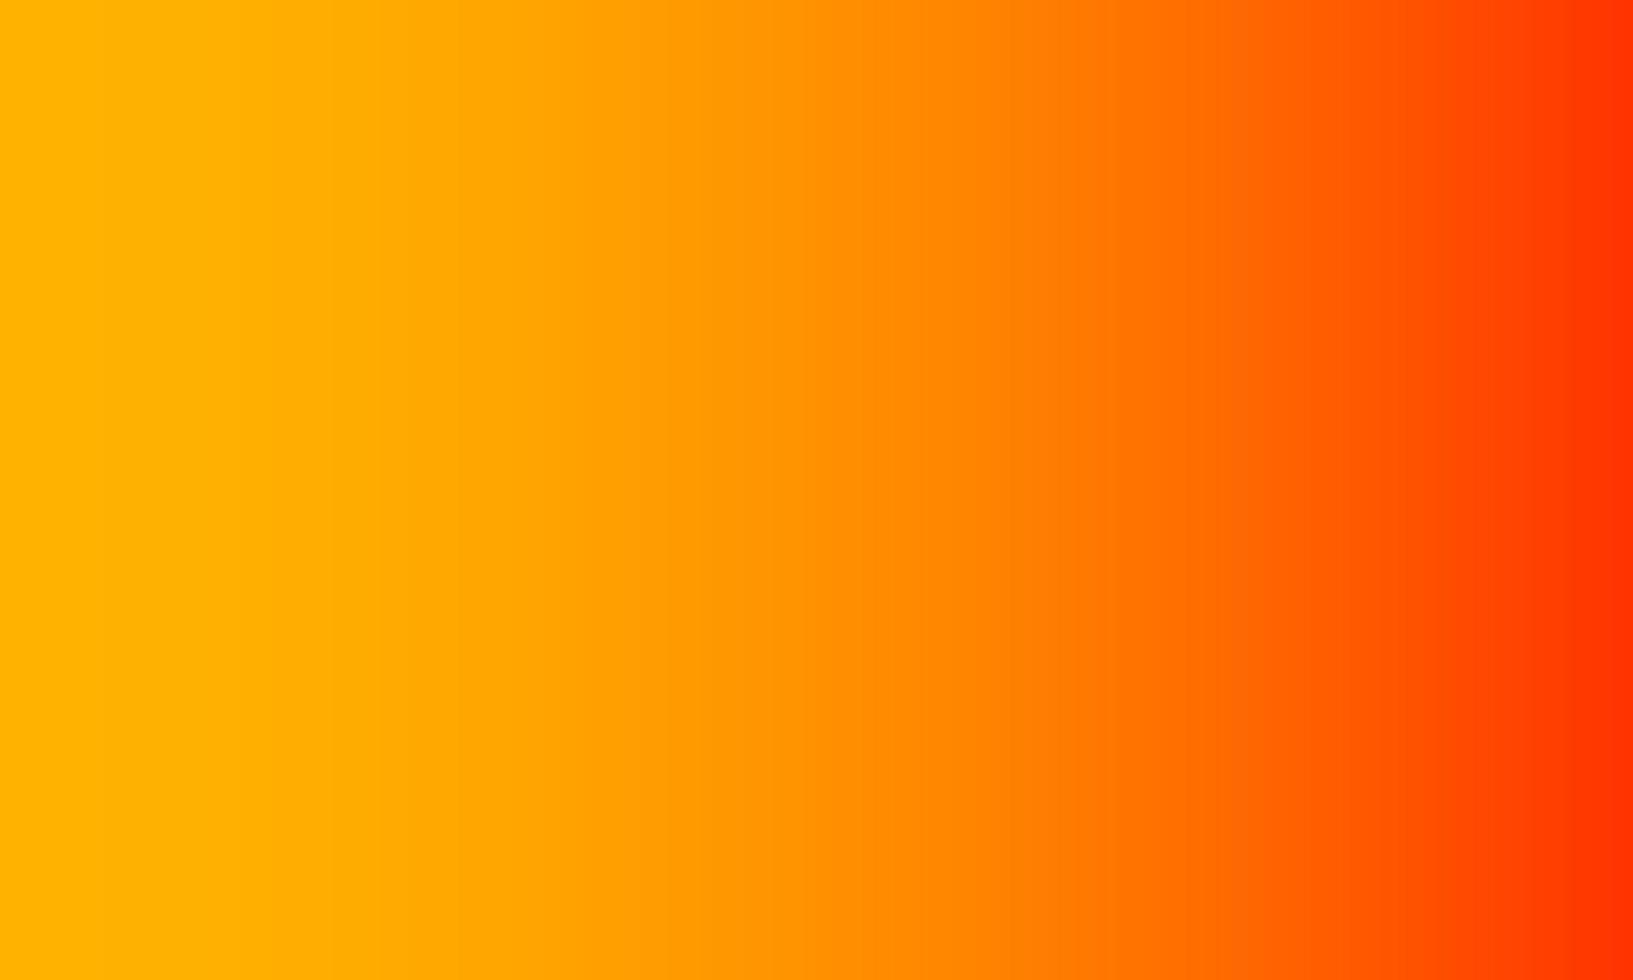 gradient background. orange and dark orange. abstract, simple, cheerful and clean style. suitable for copy space, wallpaper, background, banner, flyer or decor vector